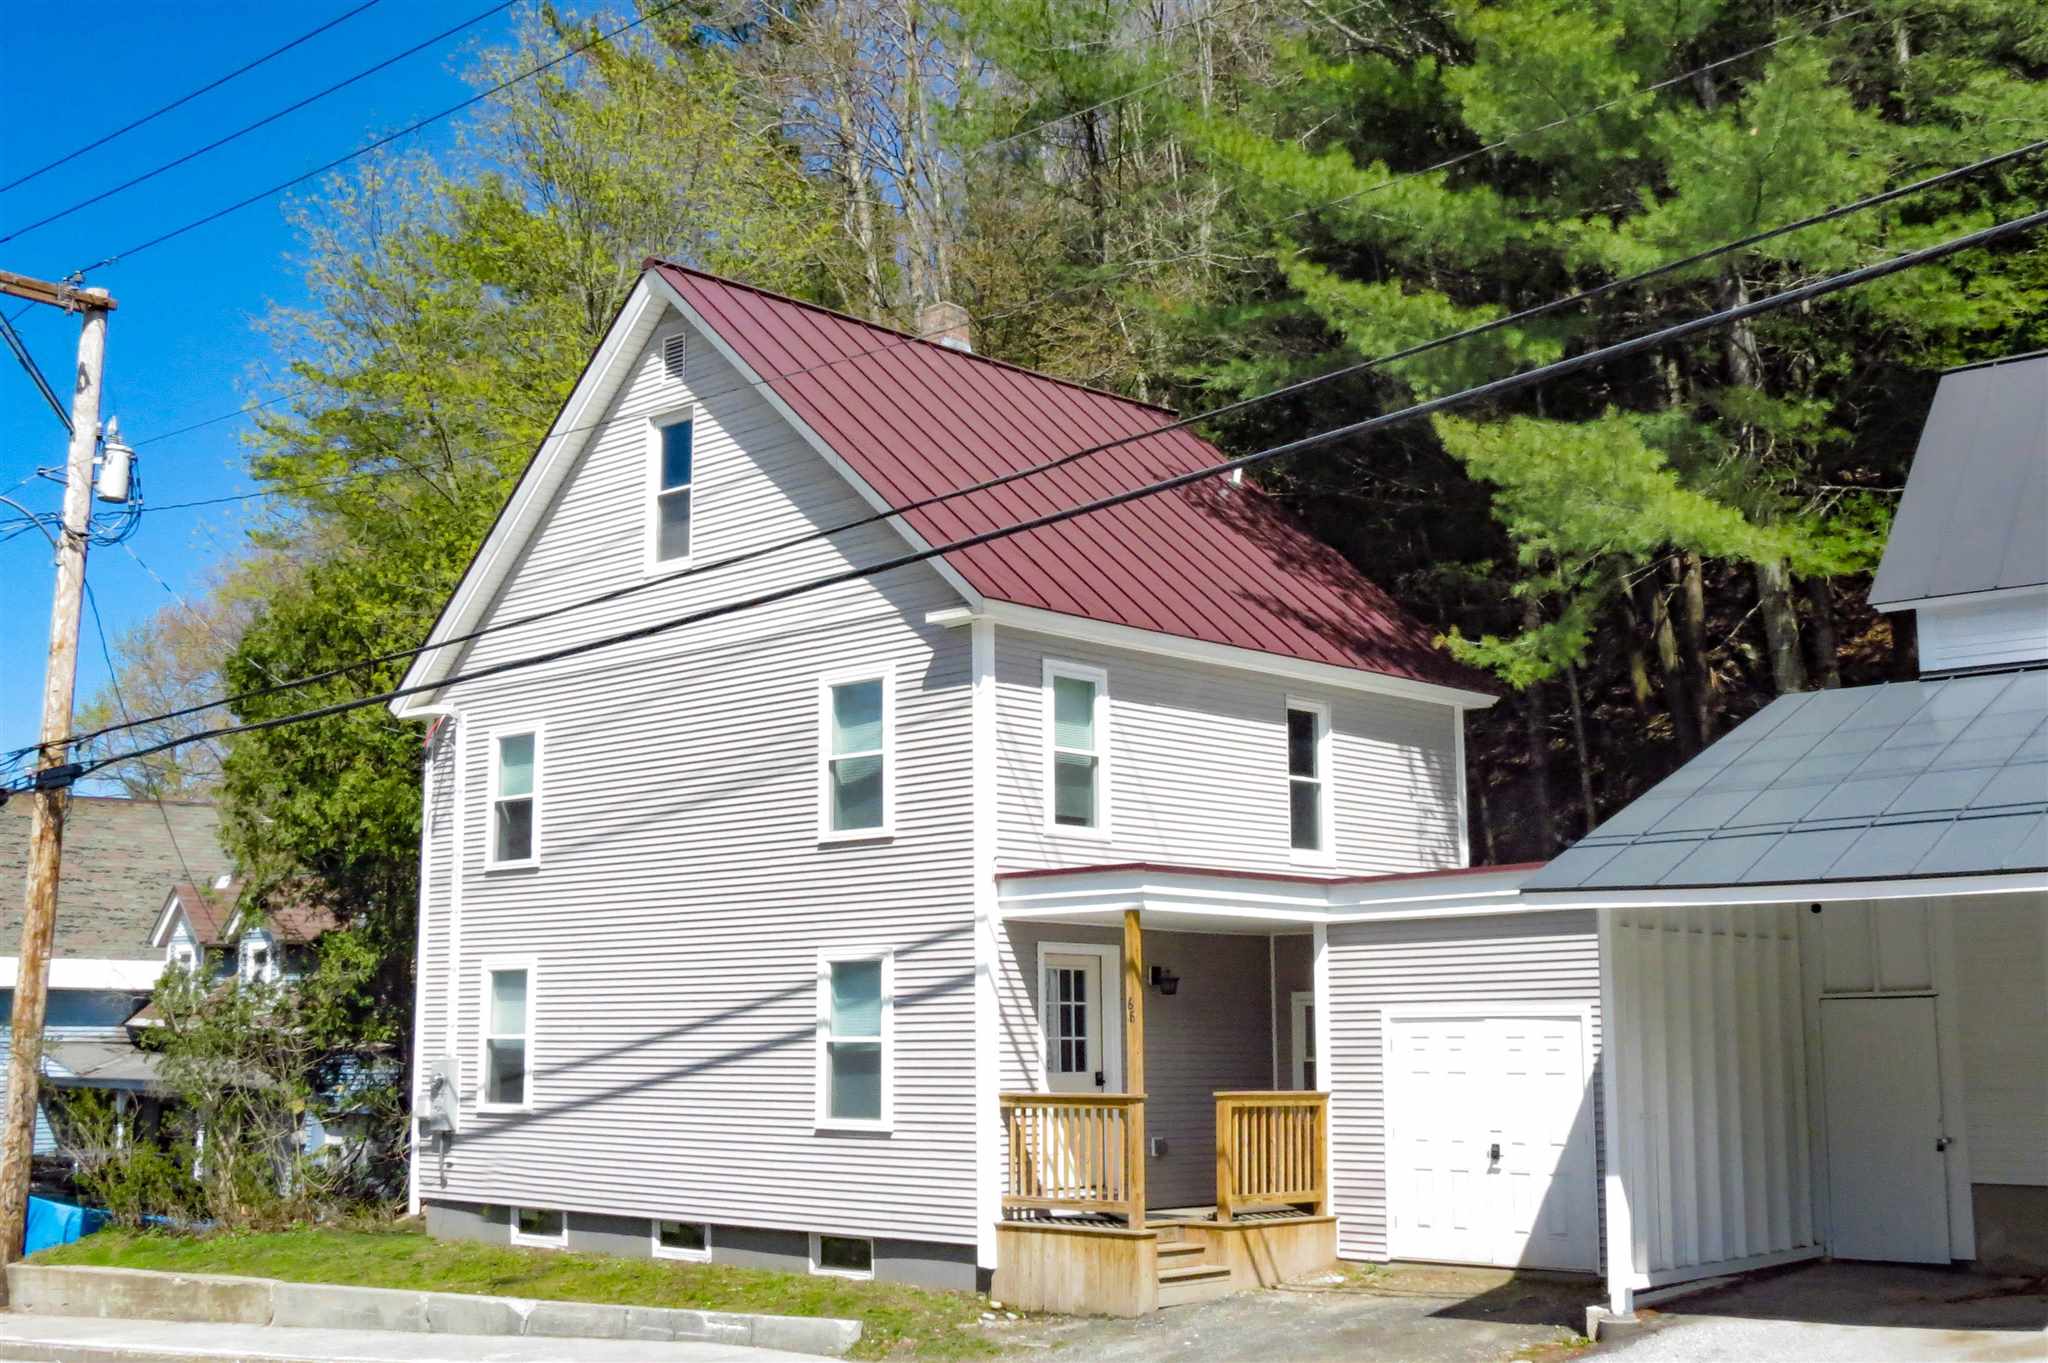 LUDLOW VT Homes for sale